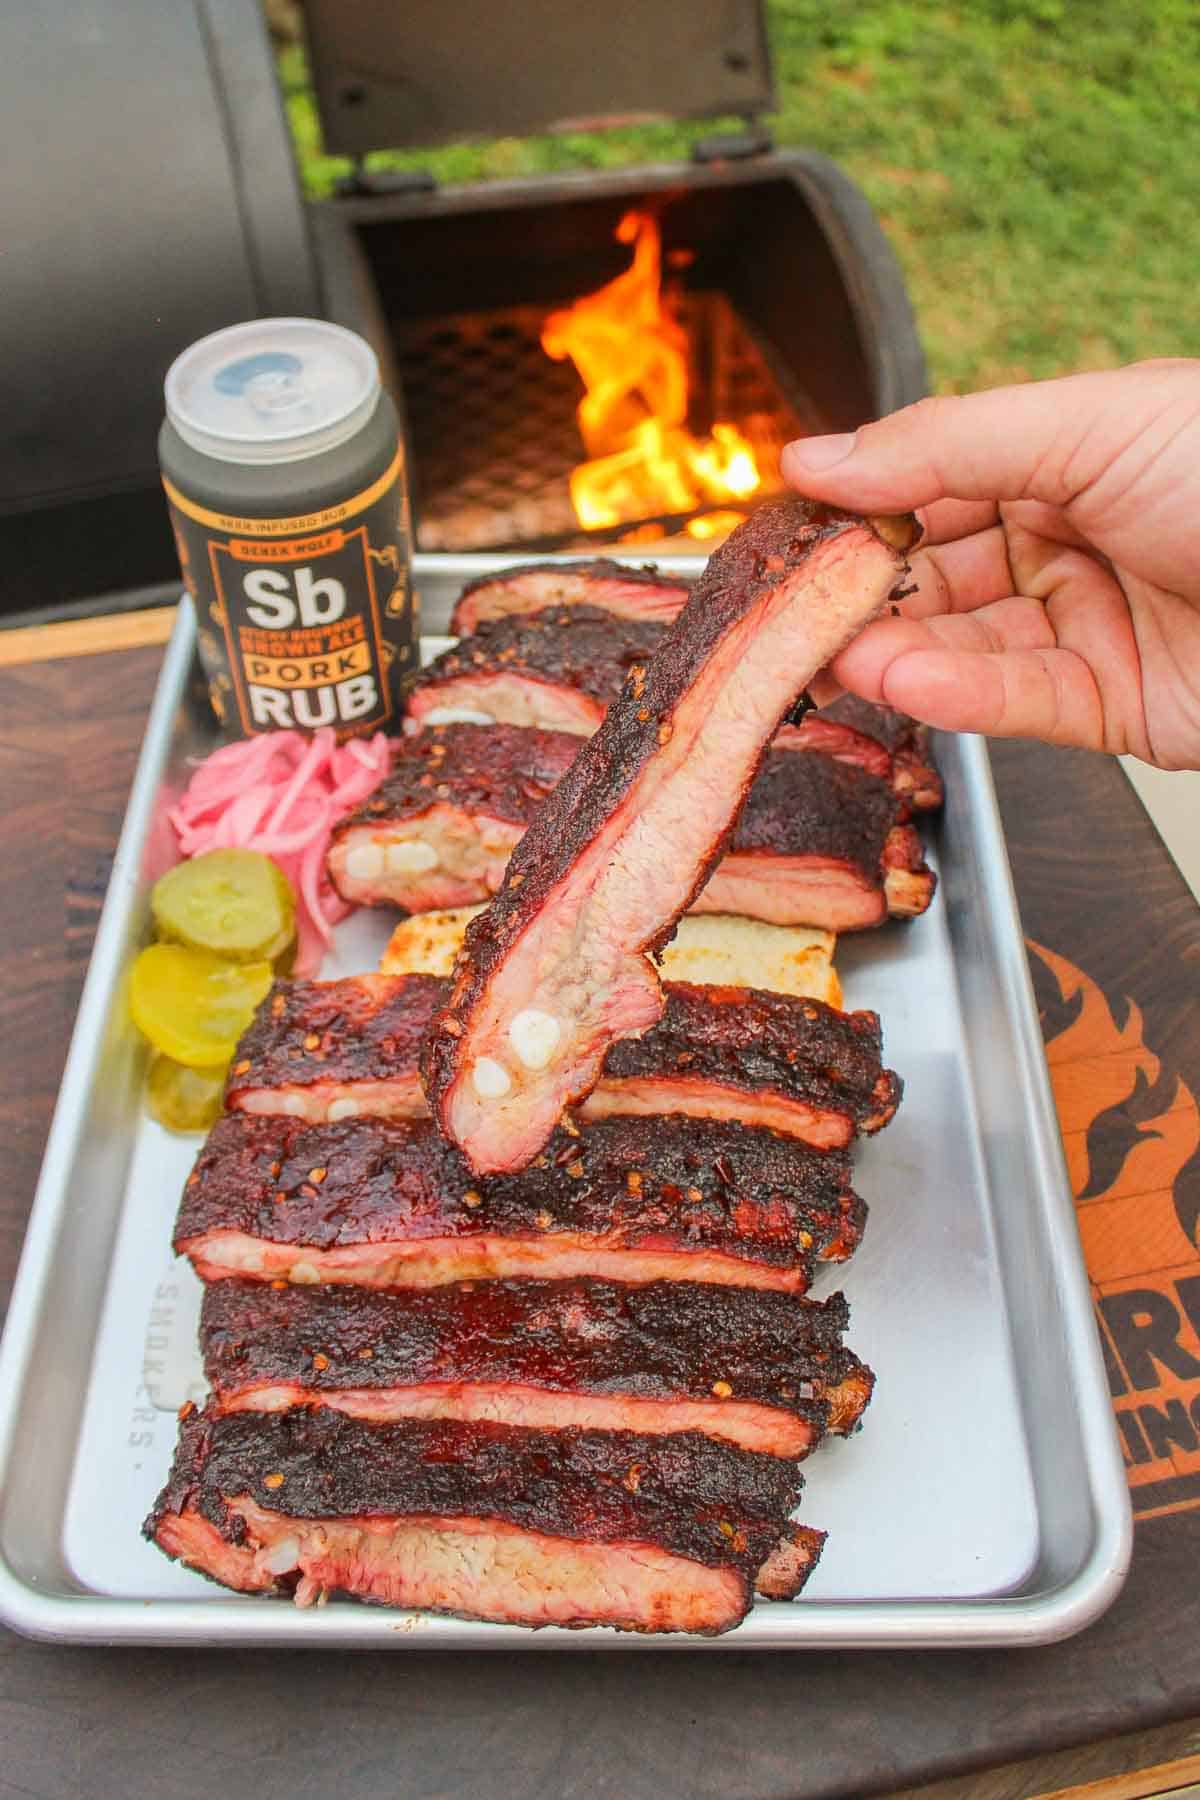 Smoked Ribs with Bourbon Mop Sauce sliced and served.